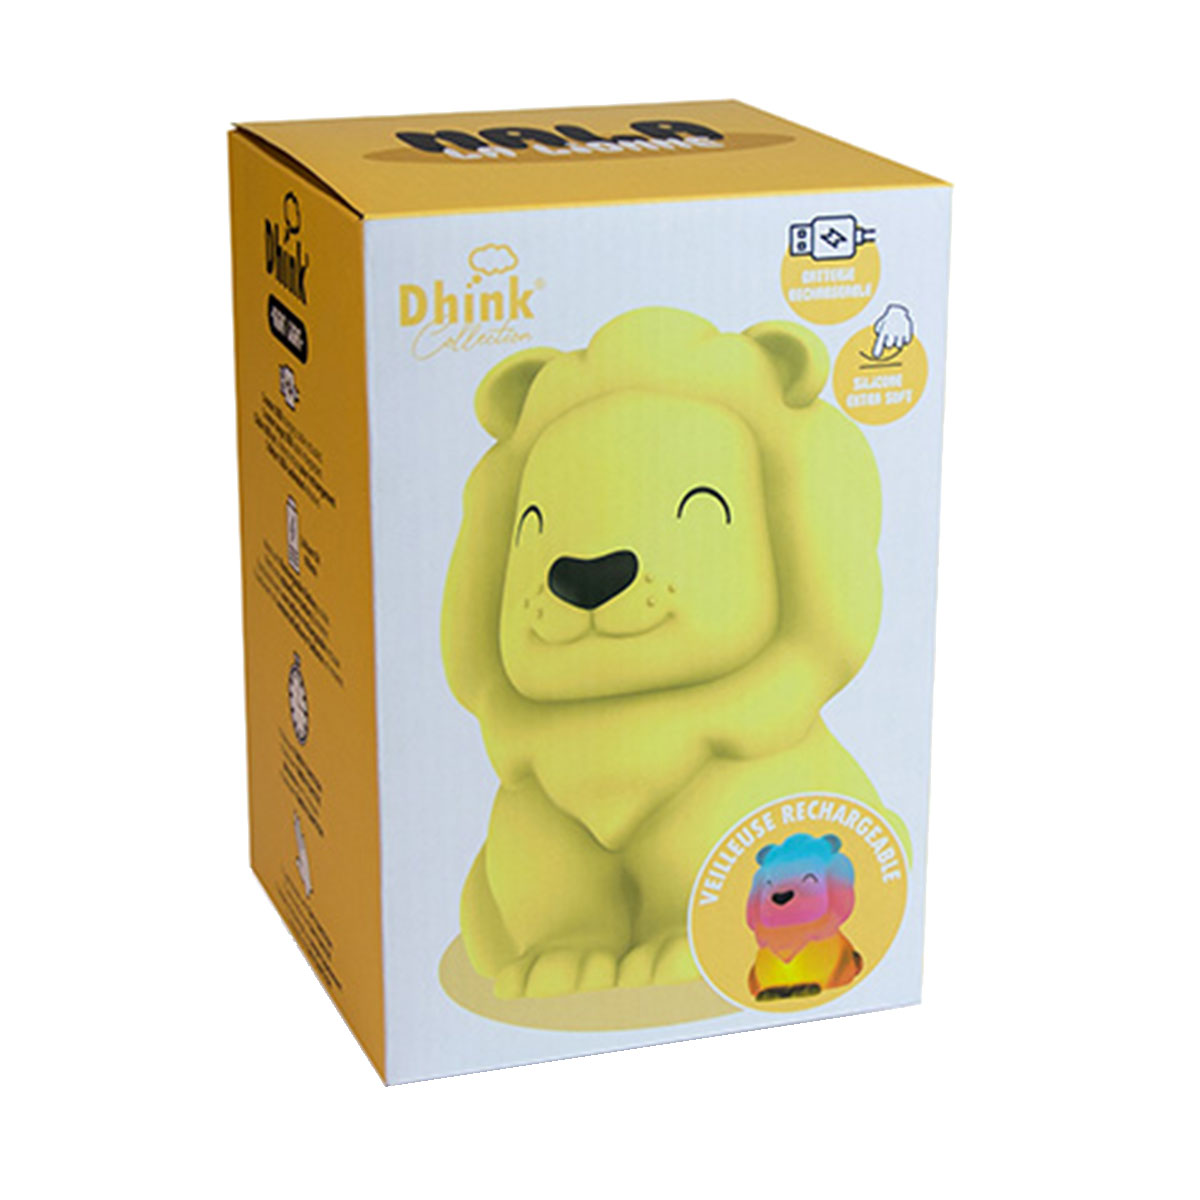 Soft rechargeable silicone night light - Lion